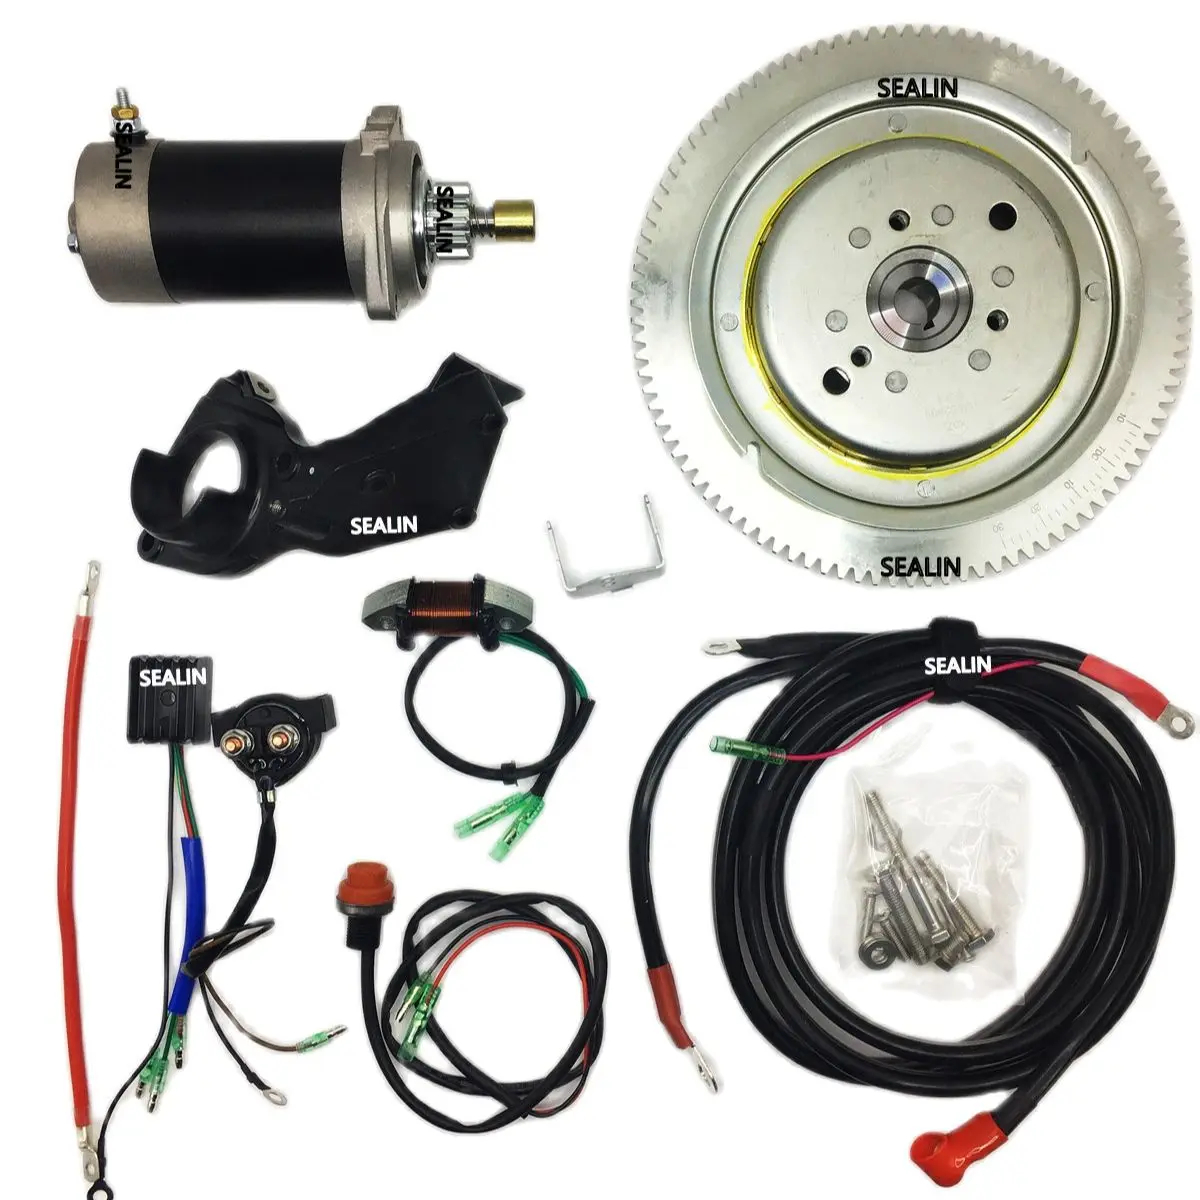 

T30 T25 E30 ELECTRIC START KIT FOR YAMAHA OUTBOARD F30HMHS/L HWL MHL 2 Stroke 496CC 25HP 30HP STARTER MOTOR FLYWHEEL CHARGE COIL